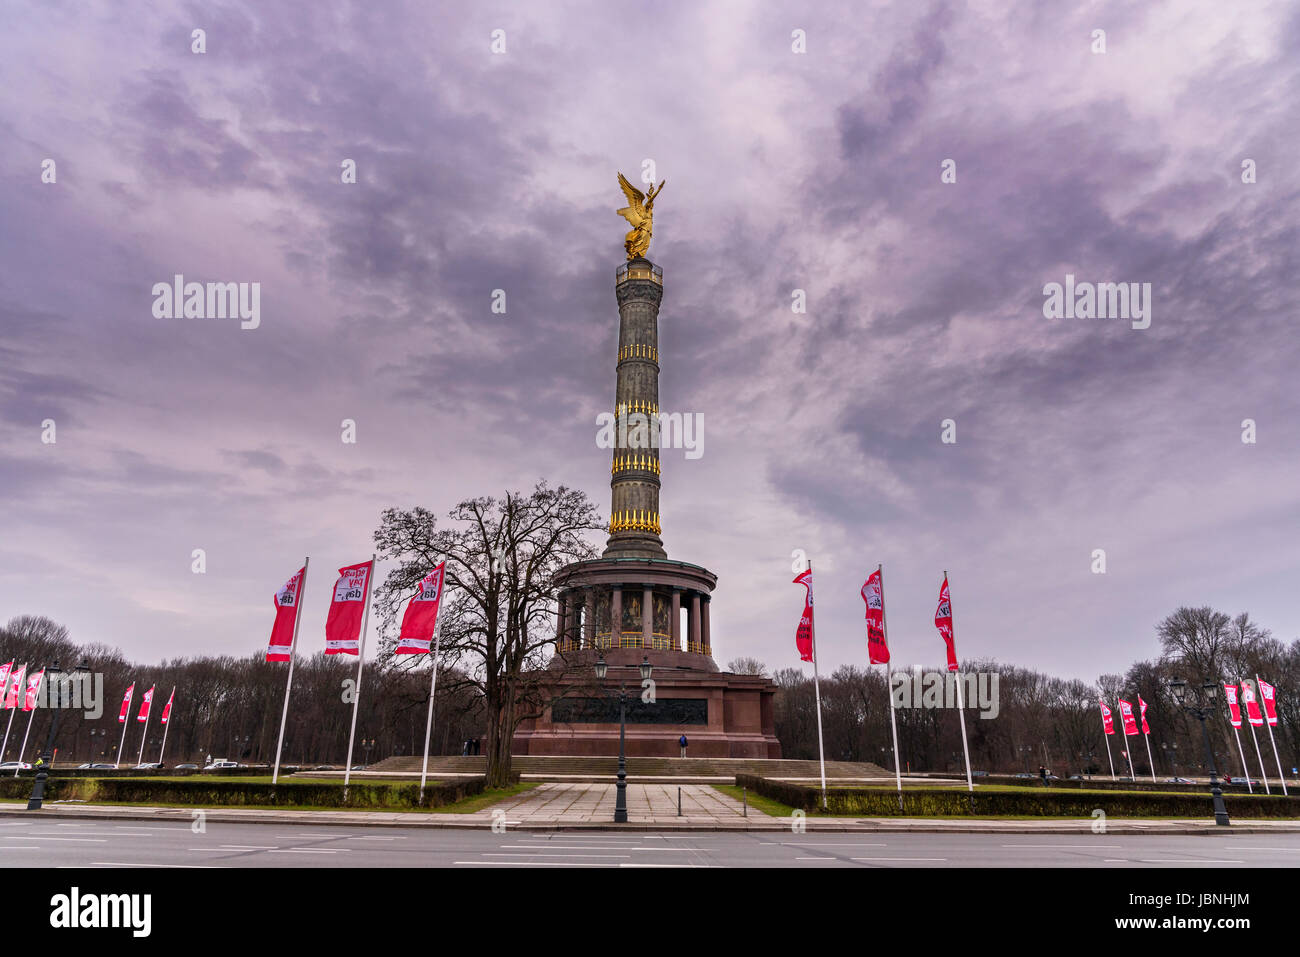 The statue of Victoria on the Victory Column (Siegessäule) at the Großer Stern intersection in Berlin. Stock Photo